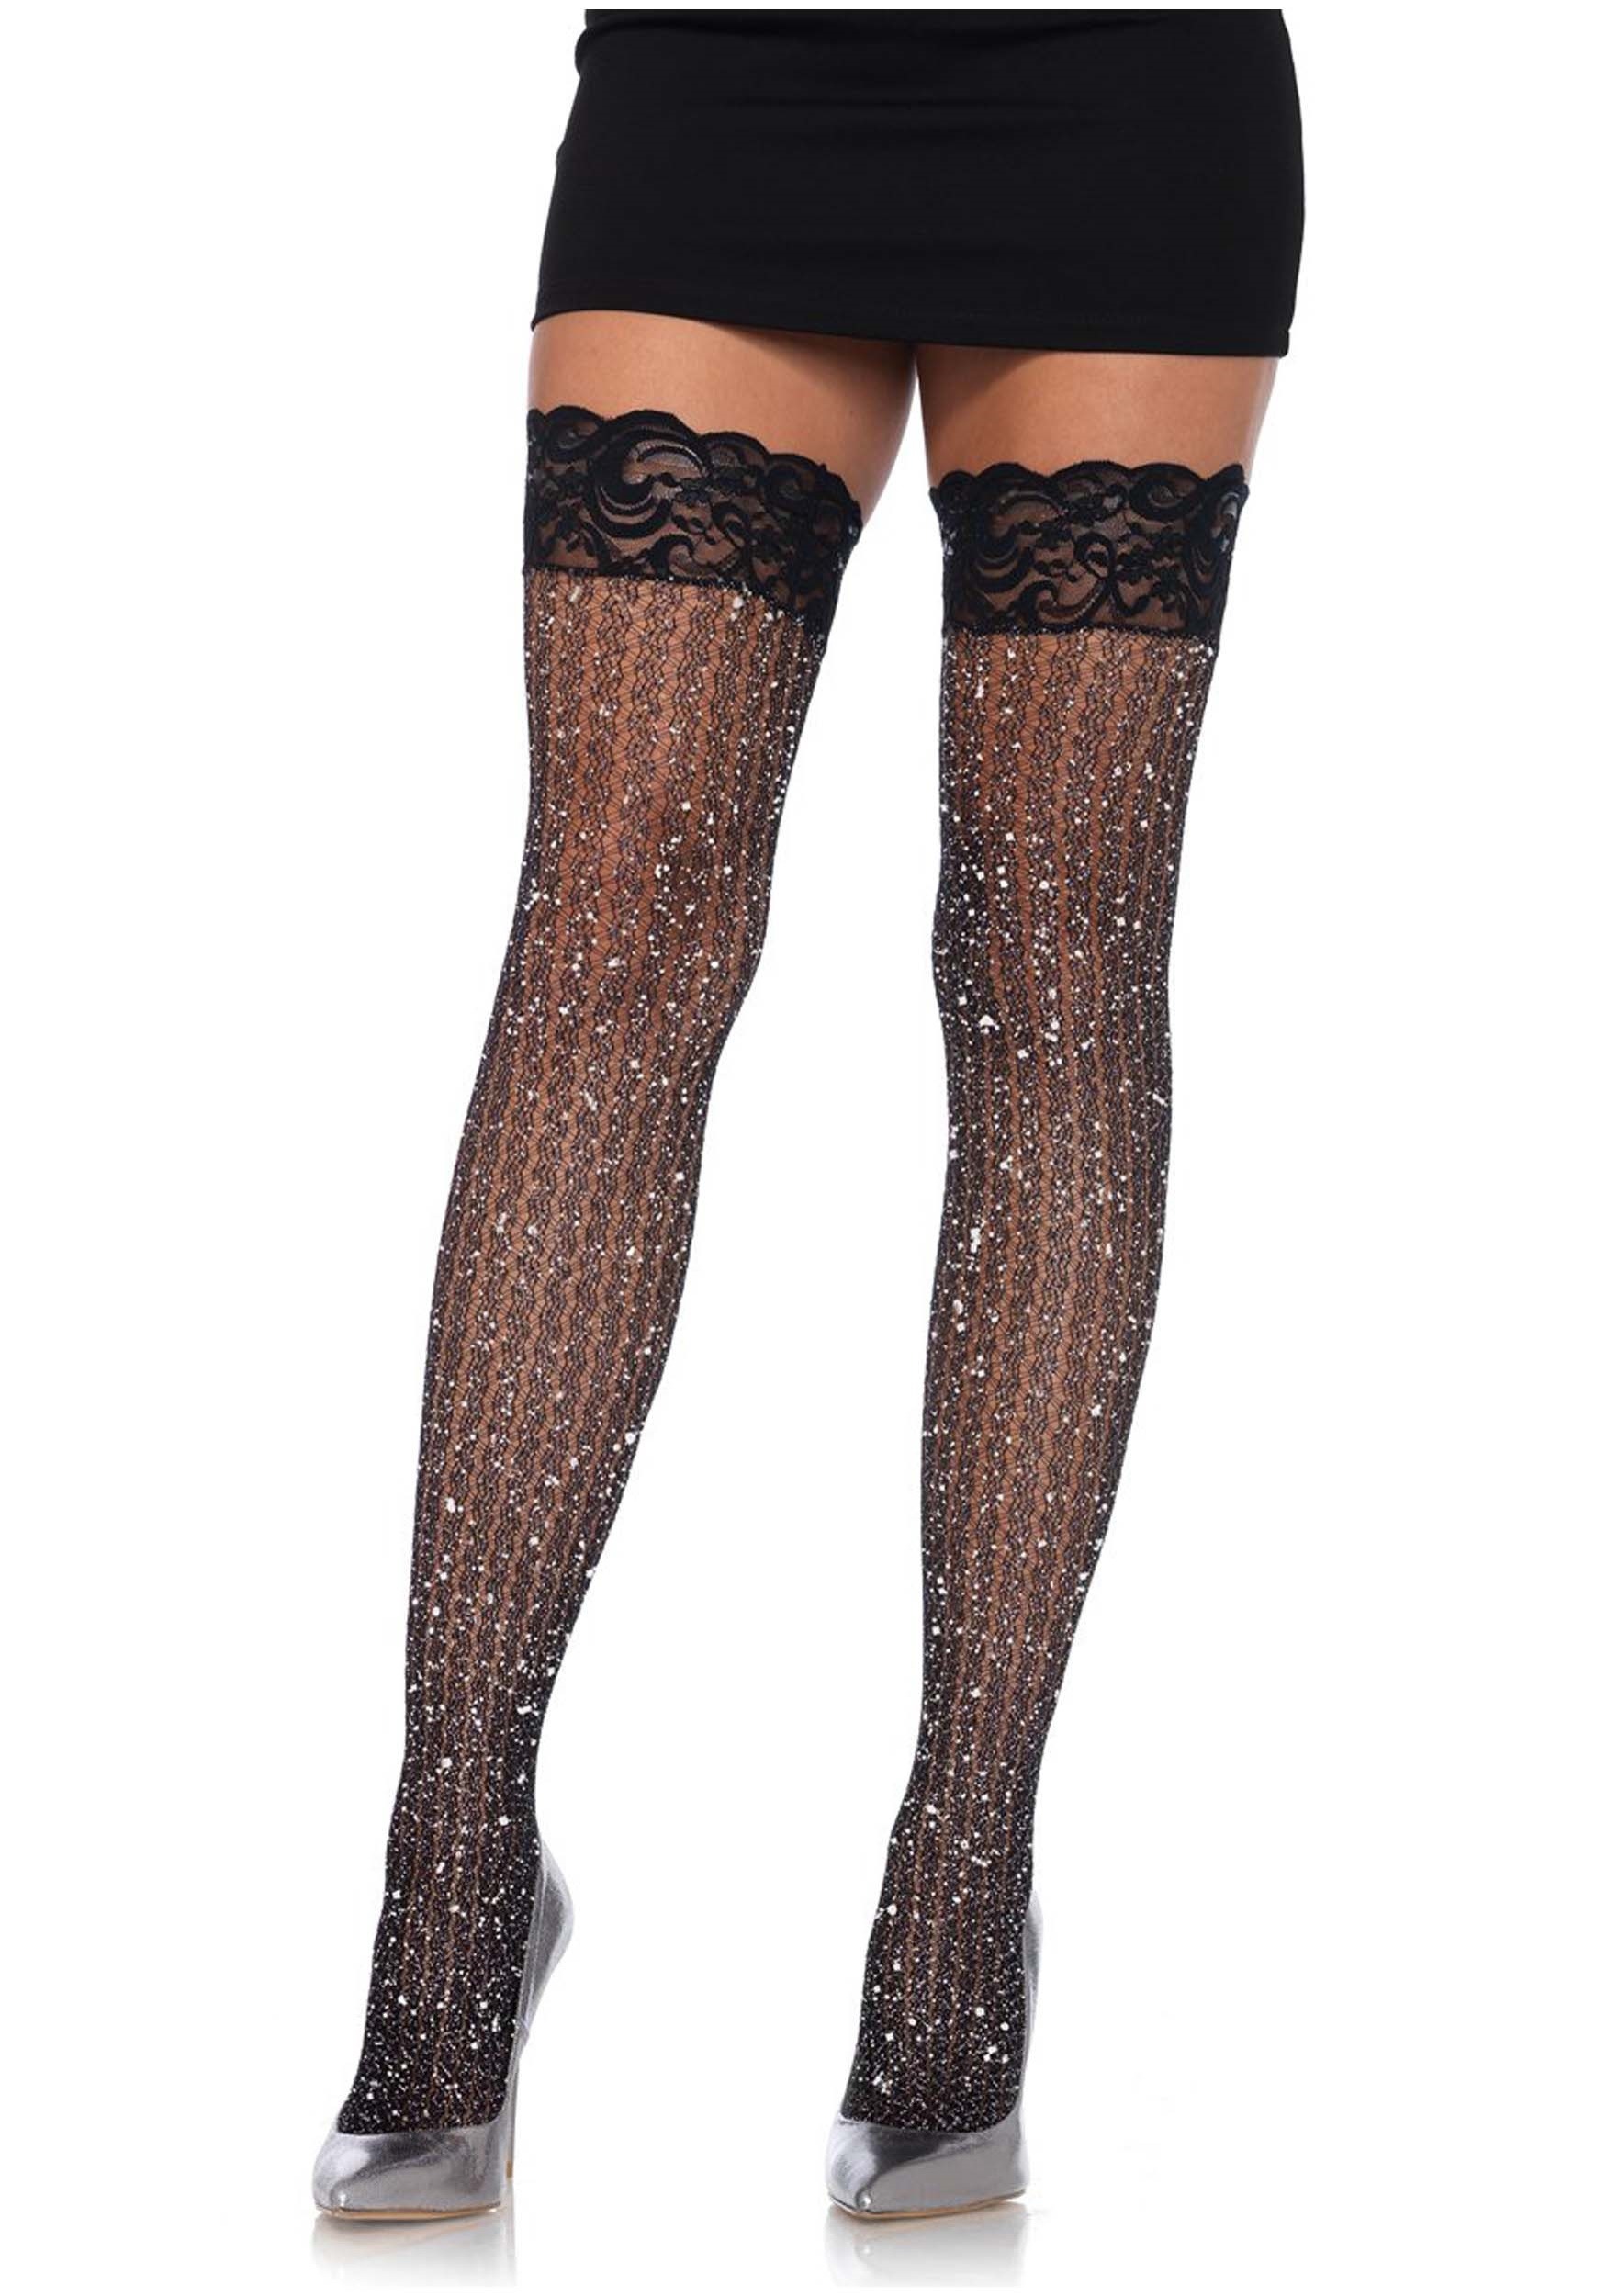 Women's Fishnet Thigh-High Stockings with Lace Top Women's Sheer Thick Thigh Highs Lace Stockings Top Stockings Romantic 